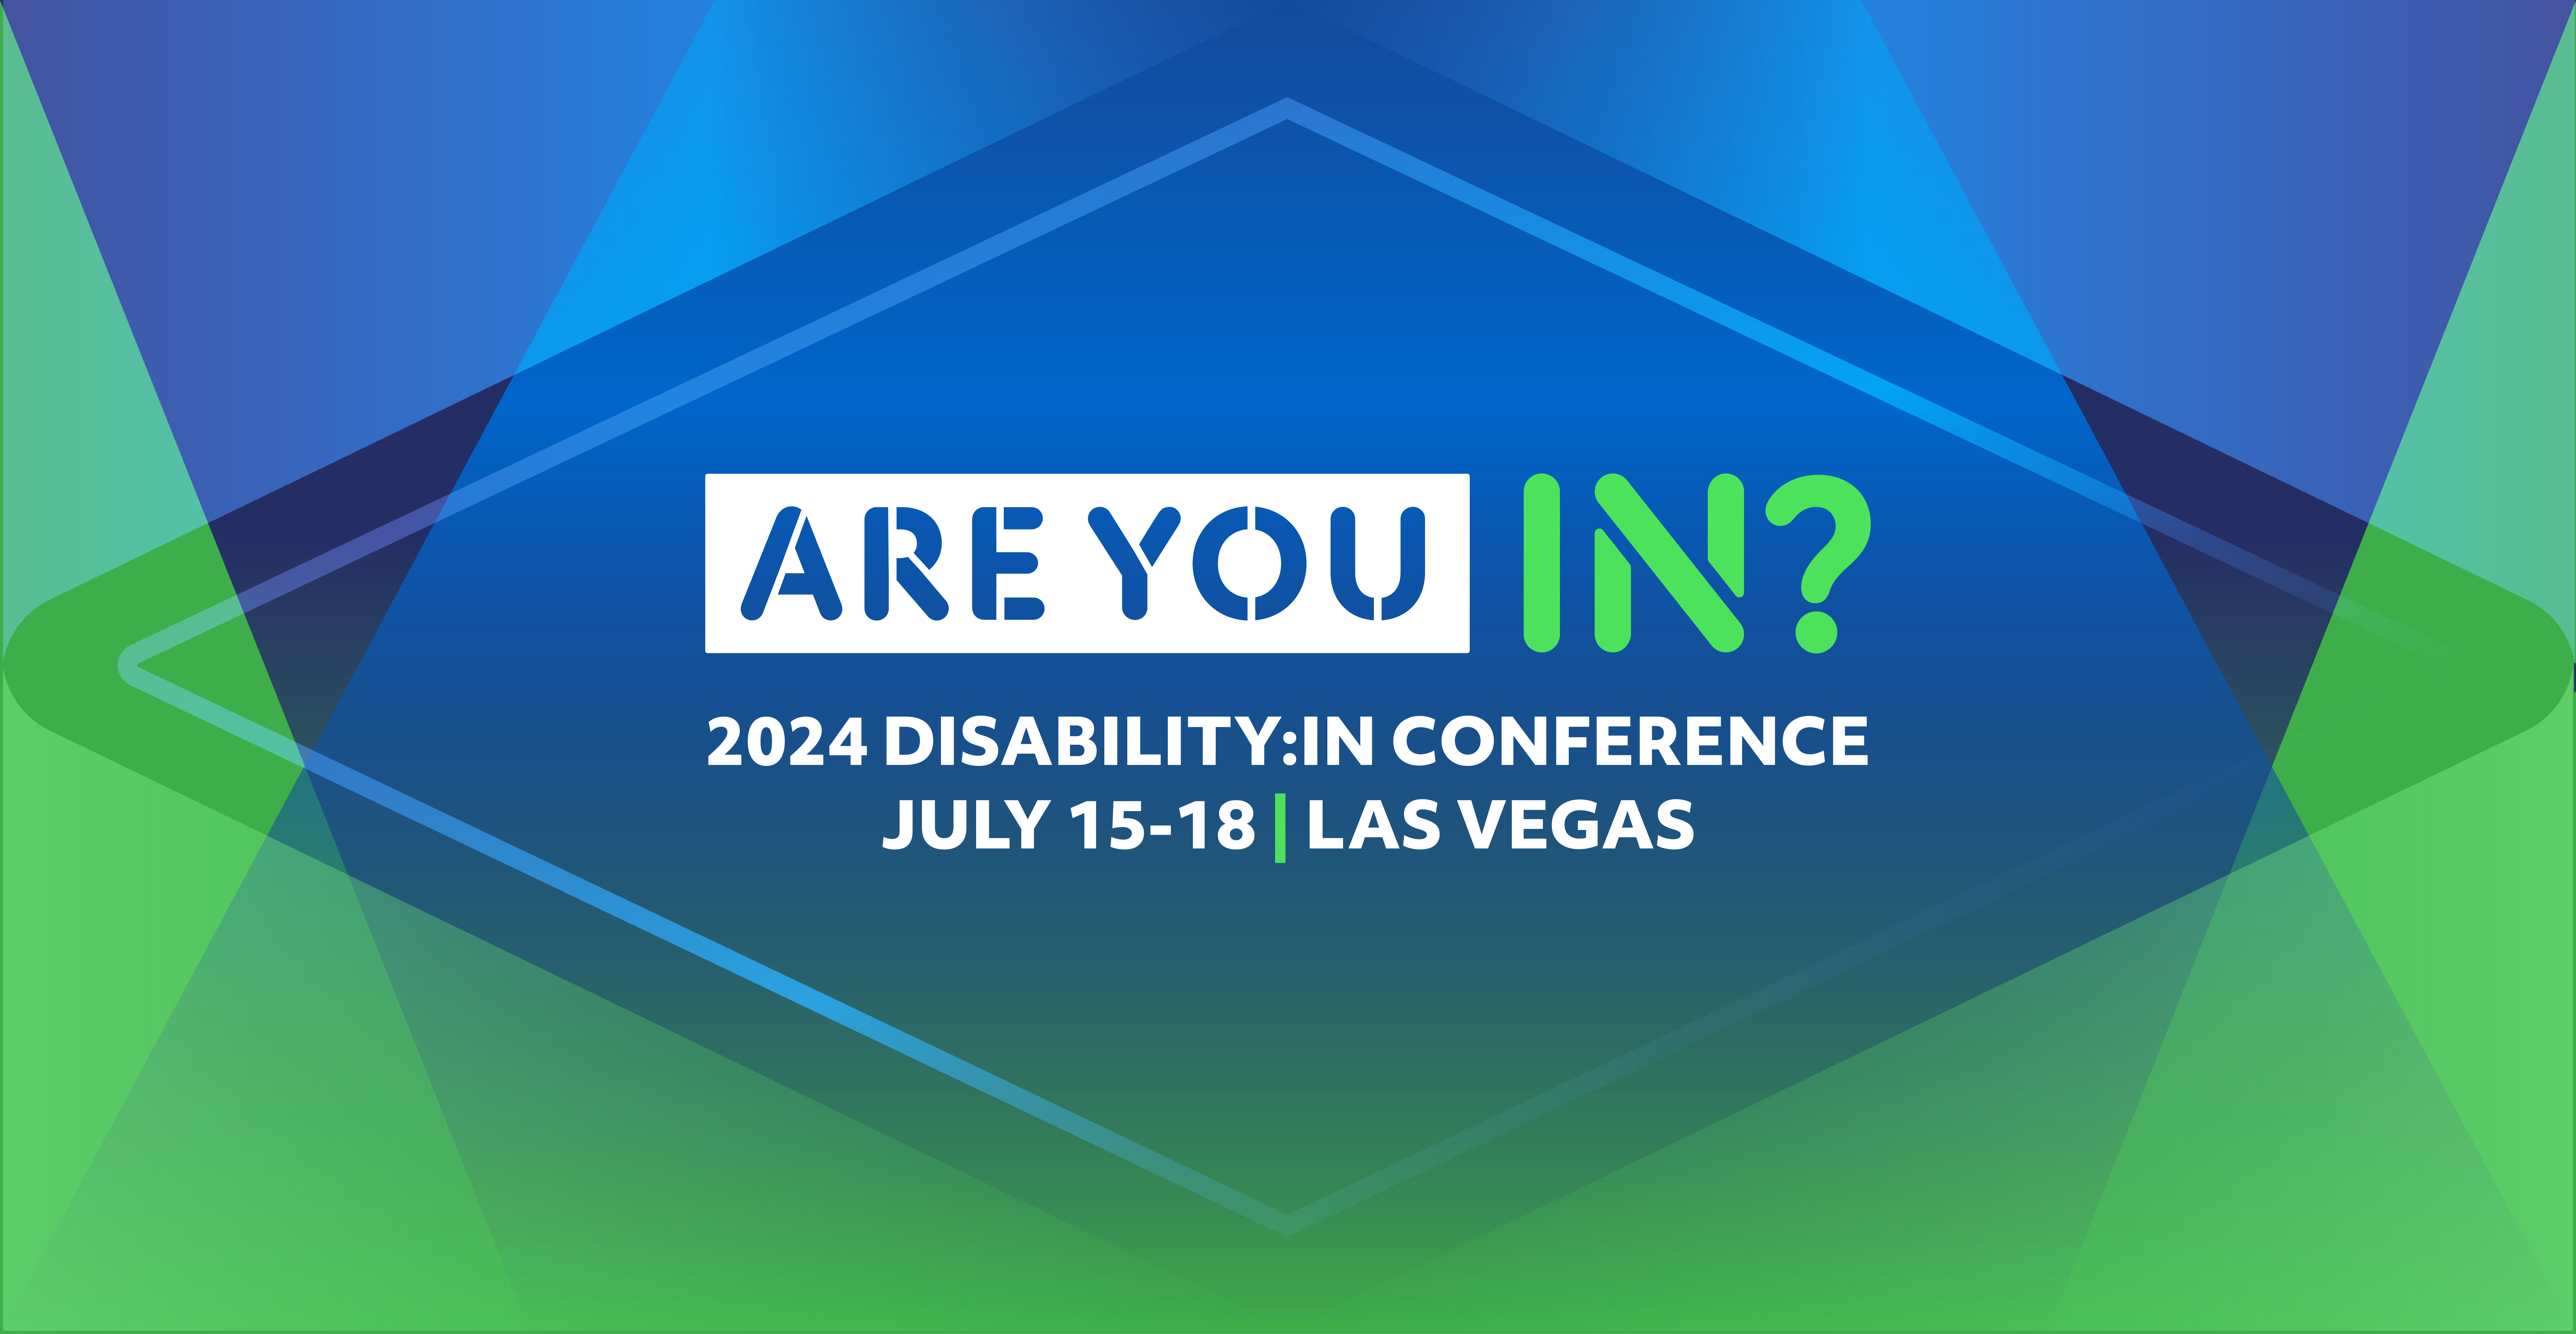 Are You IN? 2024 Disability:IN Conference, July 15-18, Las Vegas. Signage and light beams in blues and greens.